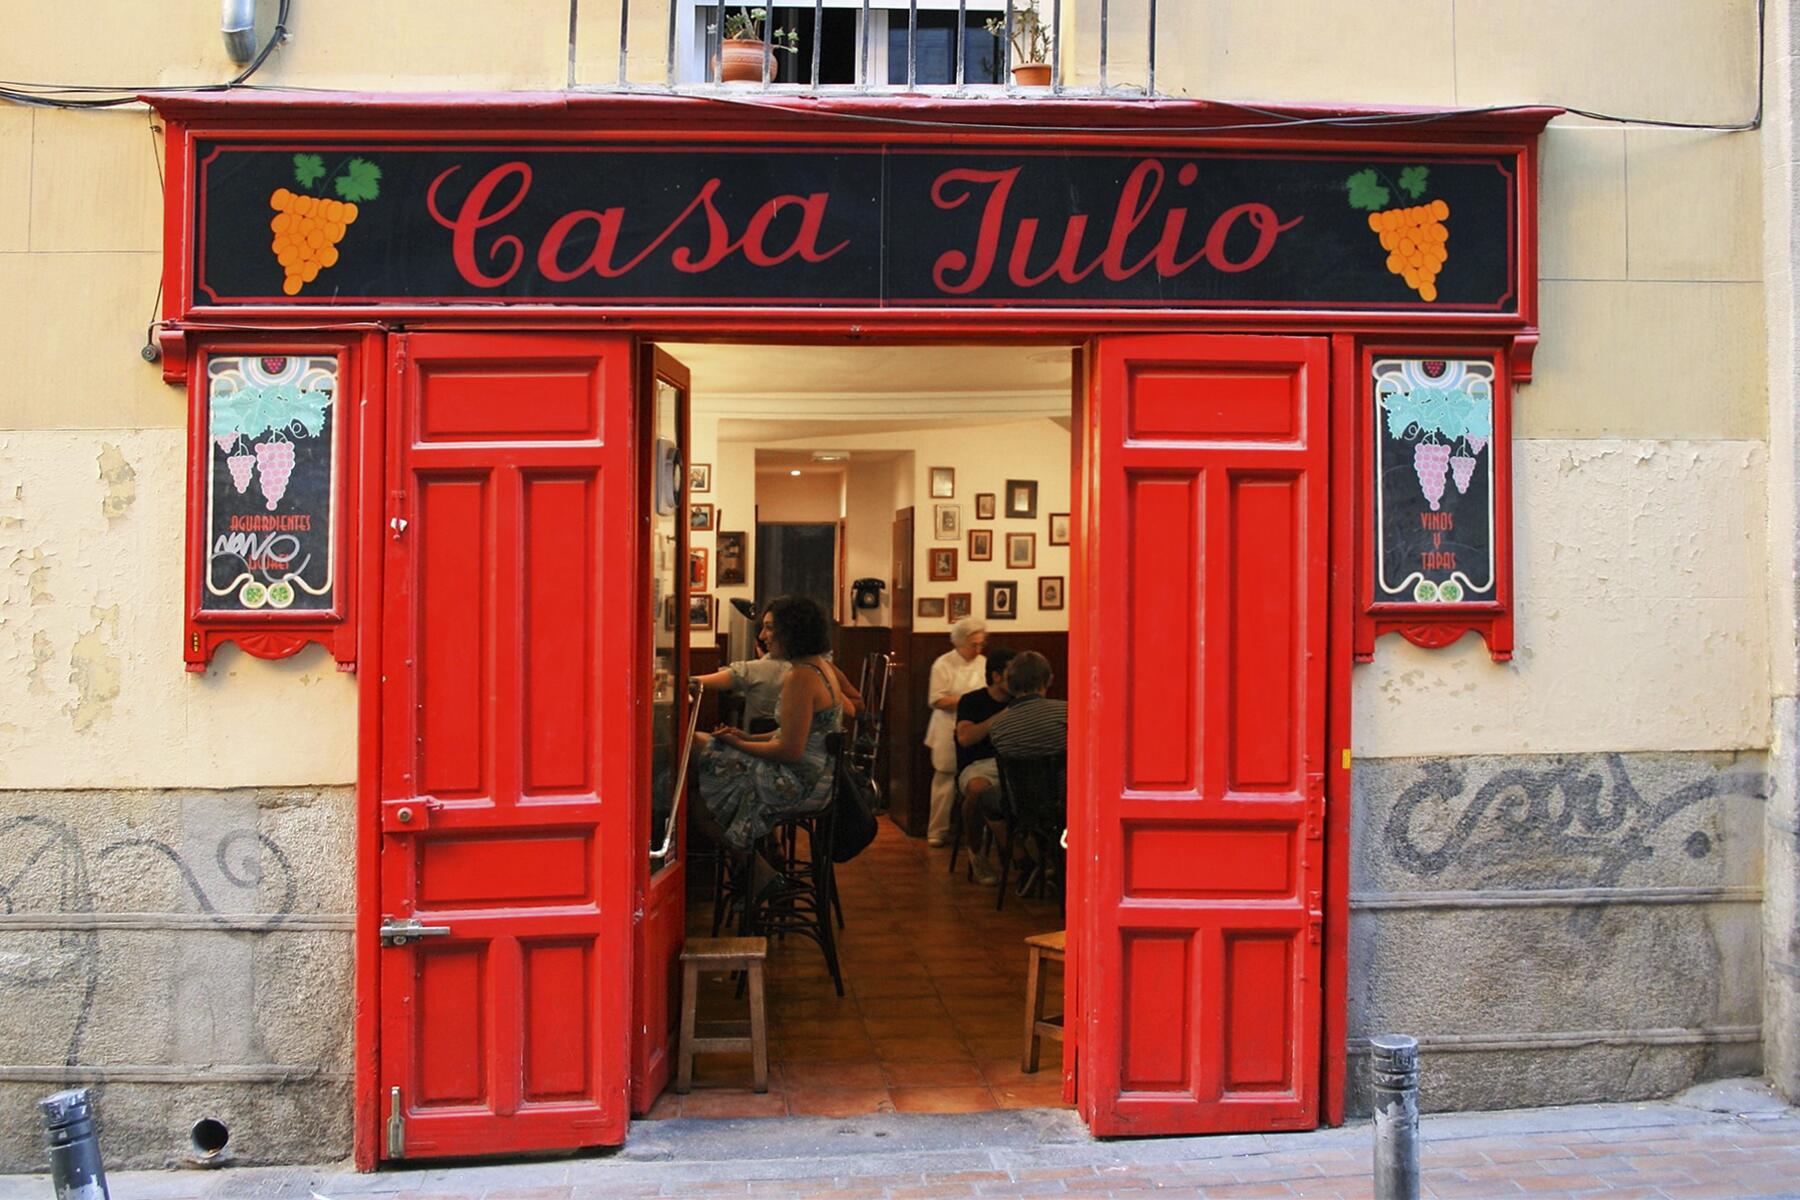 <a href='https://www.fodors.com/world/europe/spain/madrid/experiences/news/photos/best-tapas-restaurants-in-madrid#'>From &quot;The 15 Best Tapas Restaurants in Madrid: Casa Julio&quot;</a>